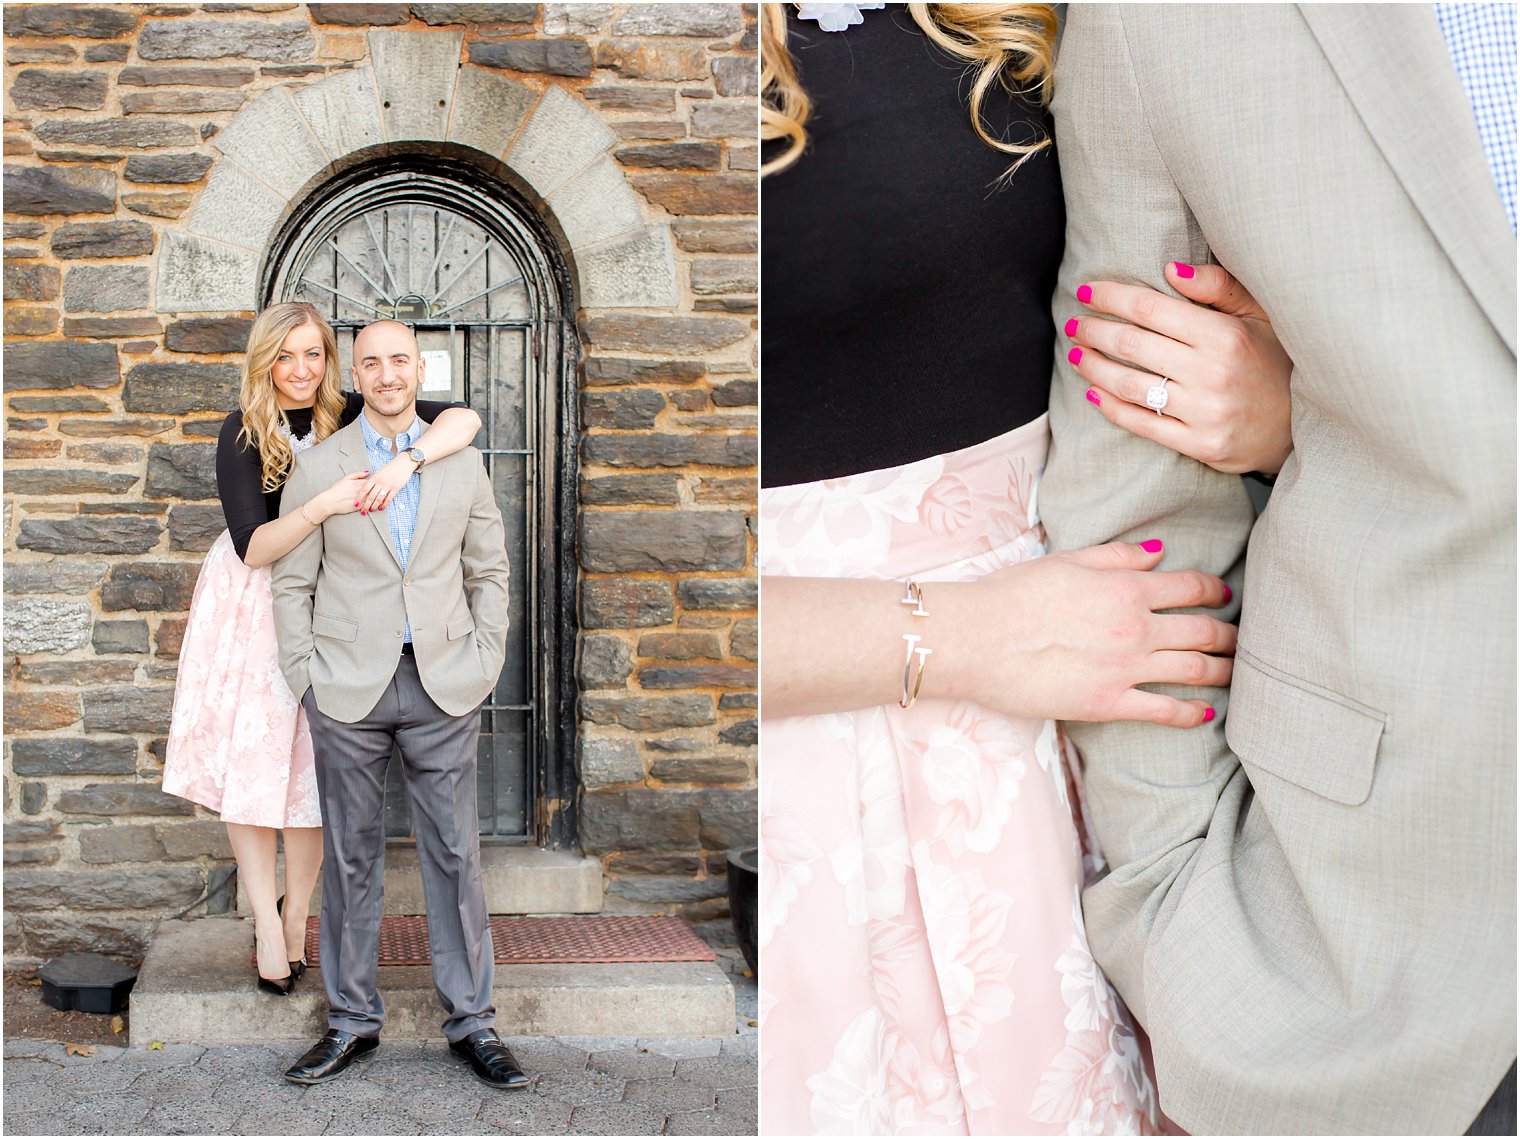 Posing ideas for engagement sessions | Photos by Idalia Photography